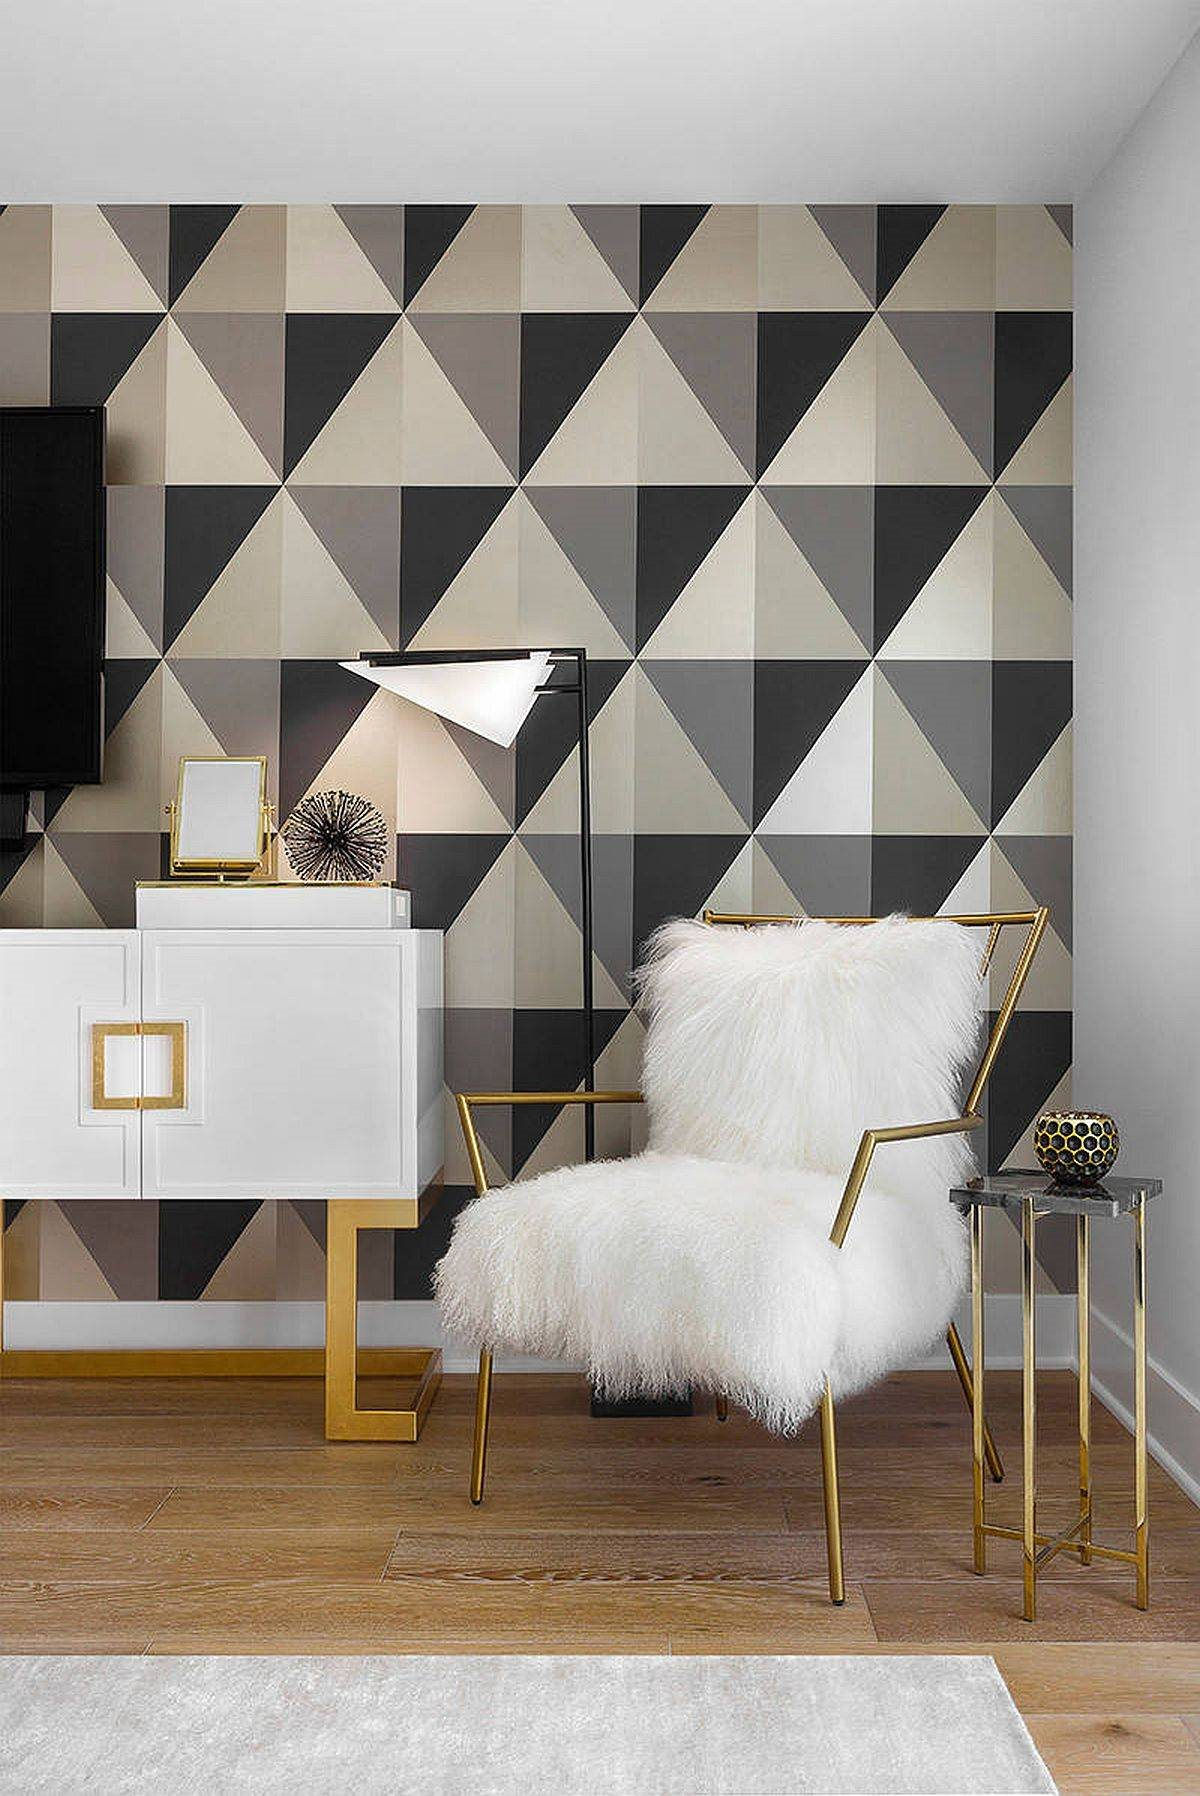 tranistional-bedroom-with-white-black-and-gray-geometric-accent-wall-and-a-hint-of-hollywood-glam-12227.jpg